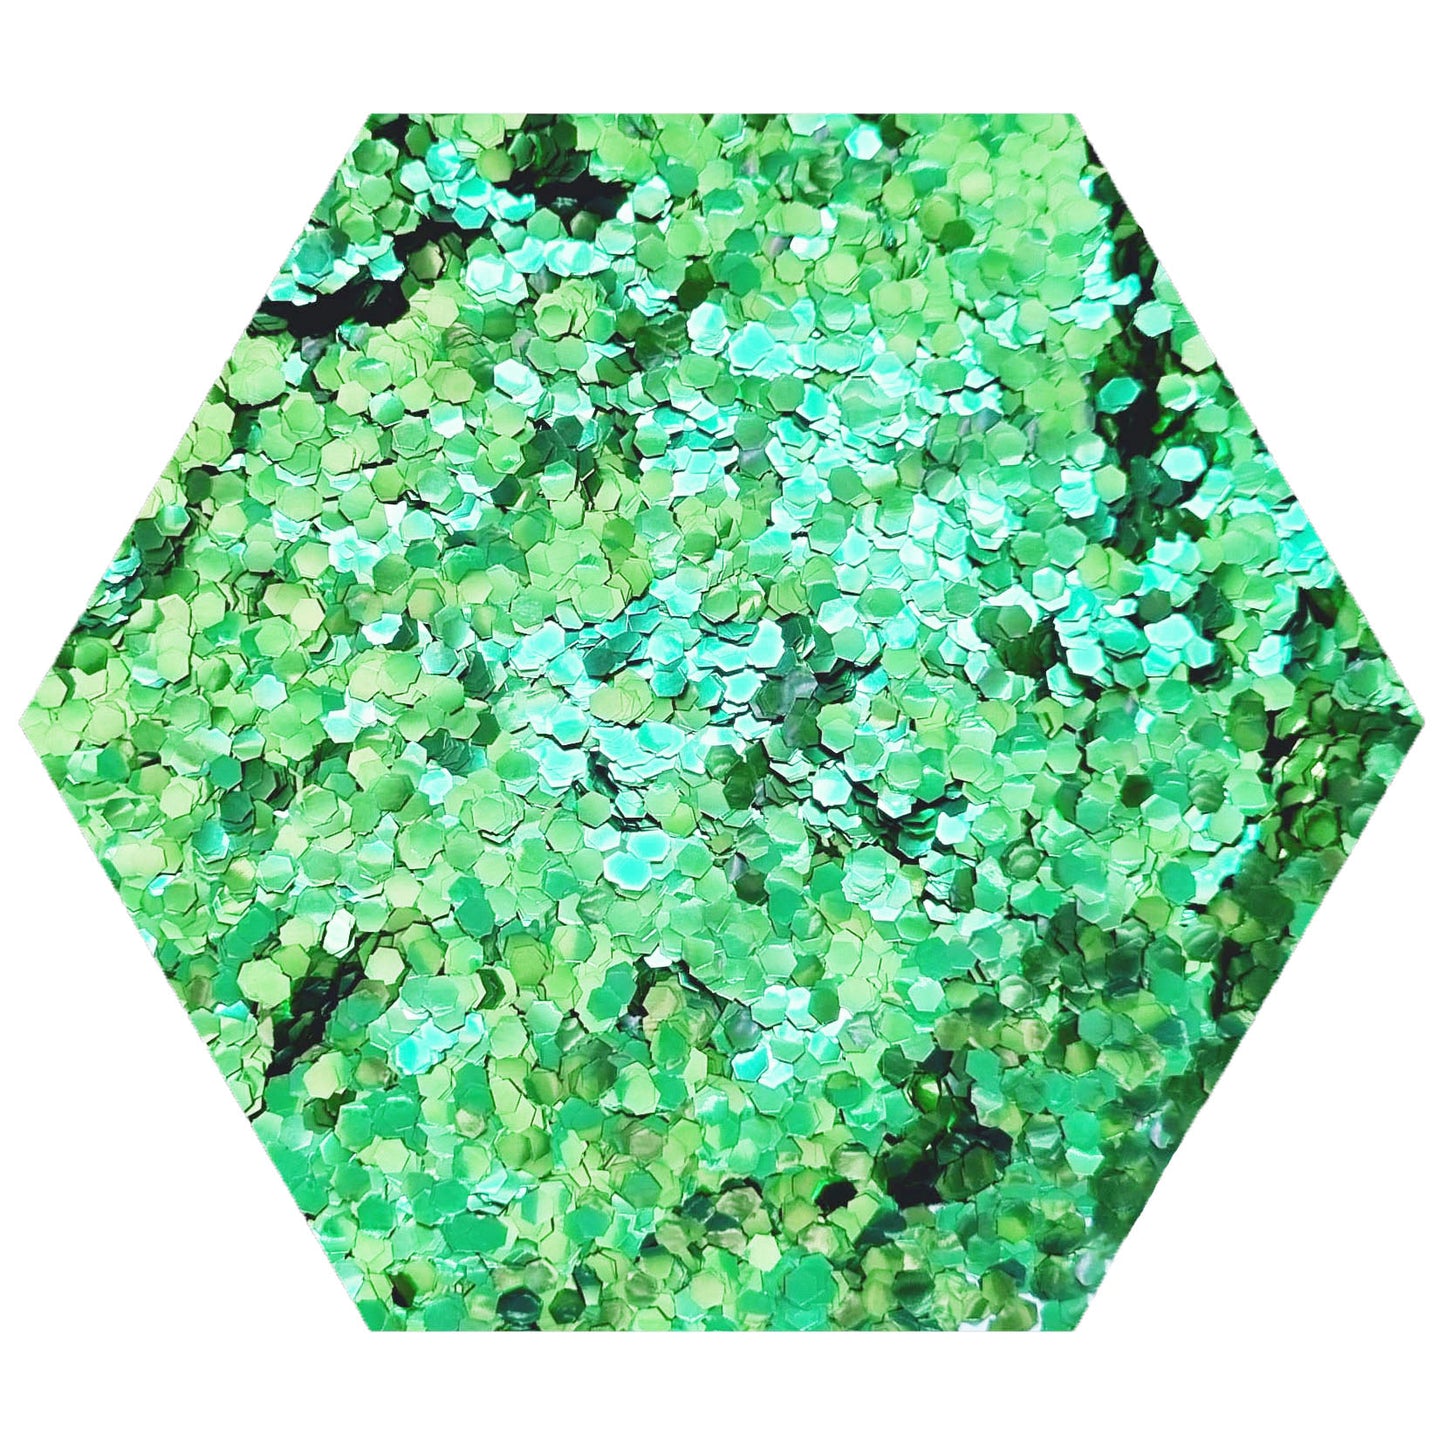 Spring Green Biodegradable Cosmetic Glitter | Chunky | Truly Personal | Wax Melt Bath Bombs Soap